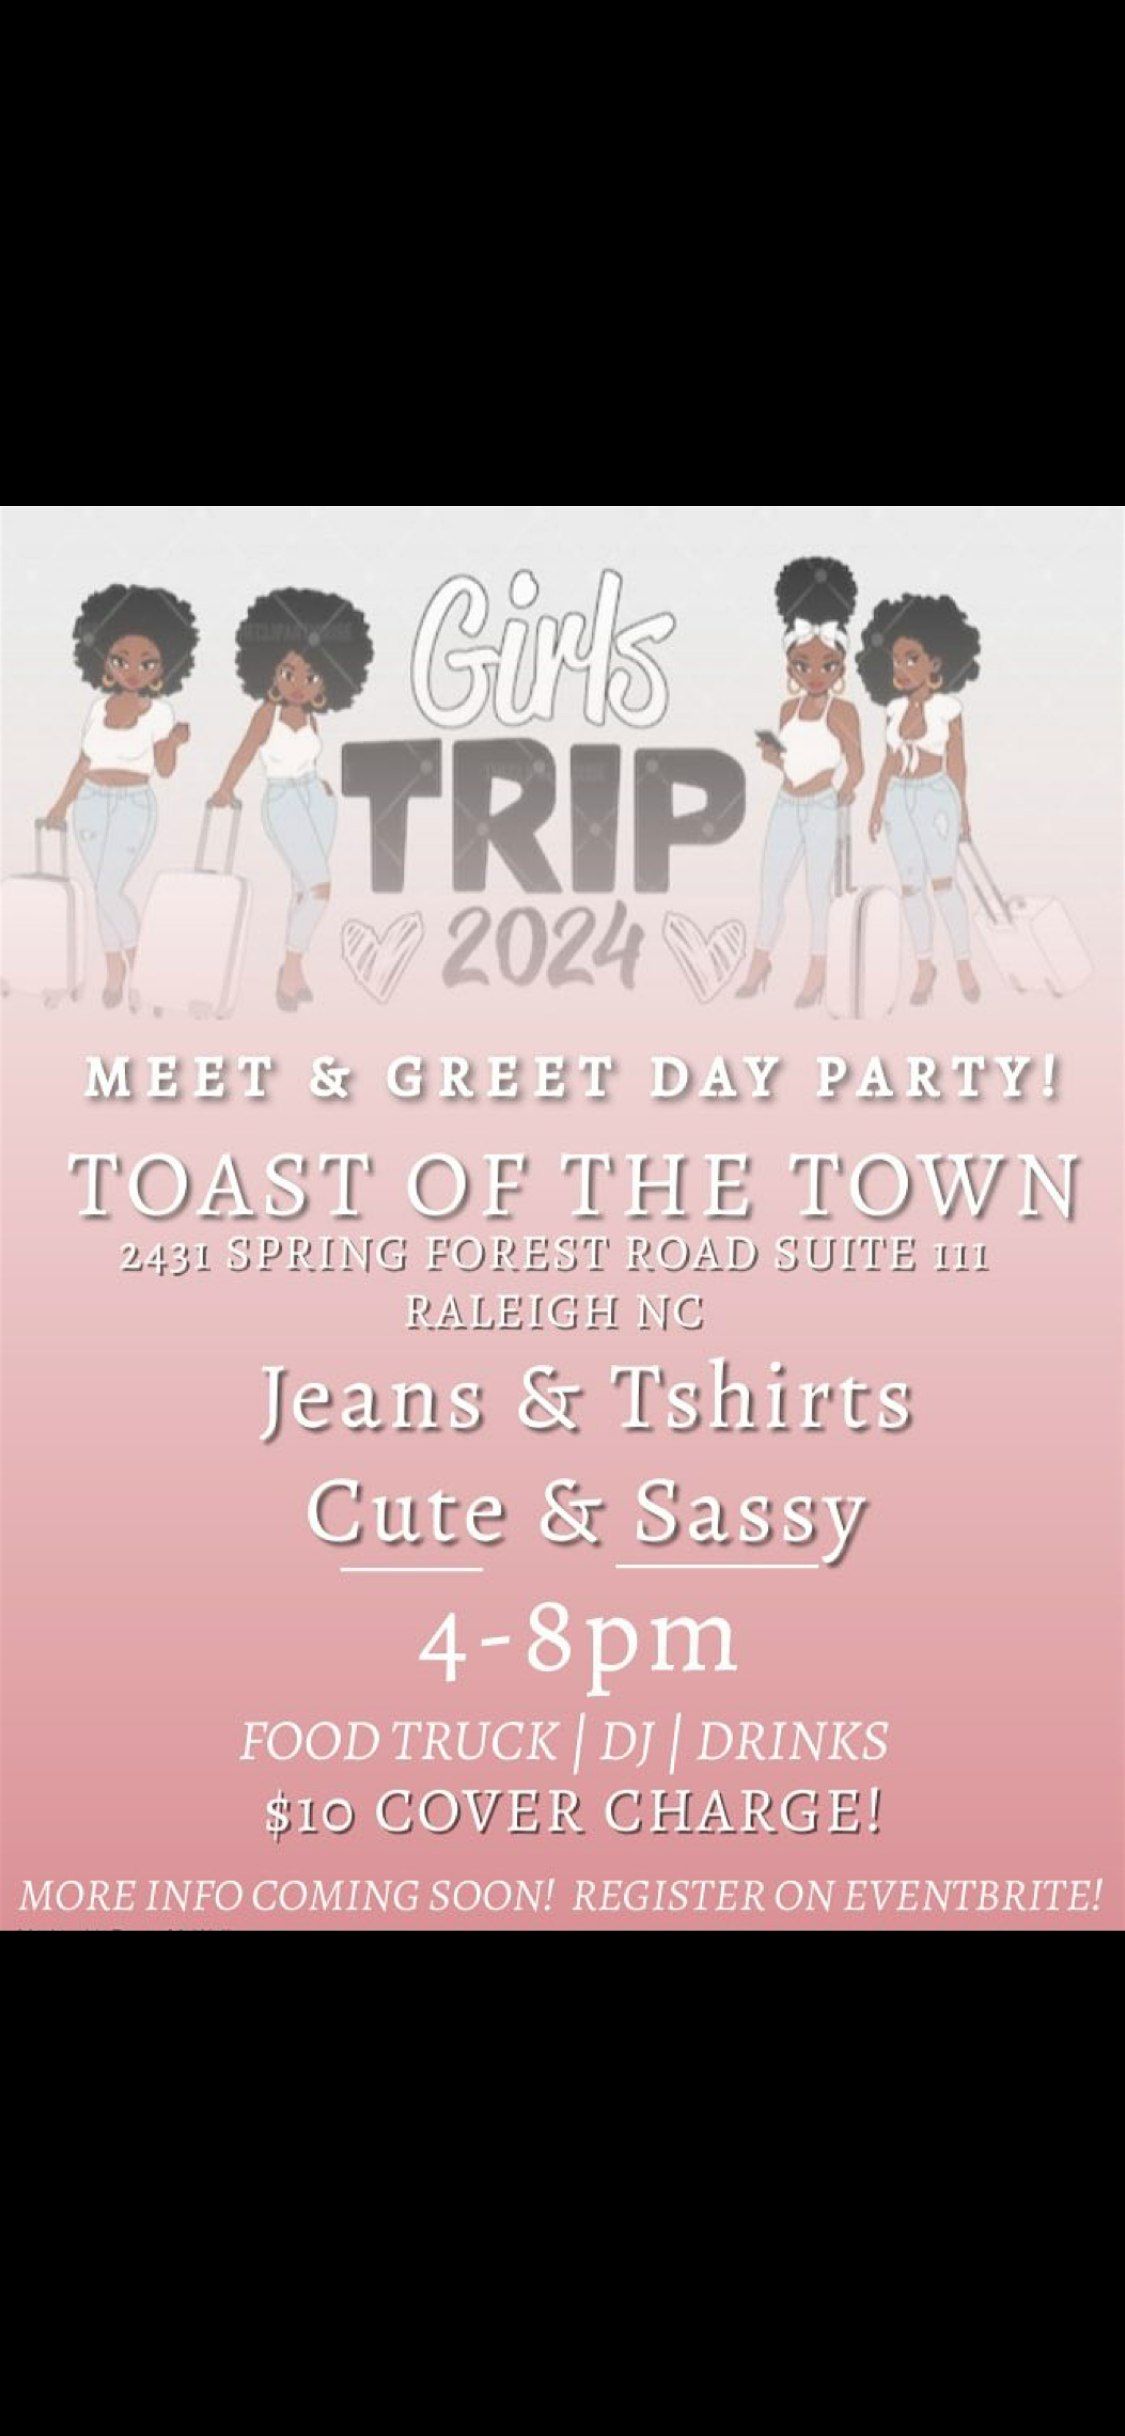 Girls Travel on a budget Meet and Greet Day Party